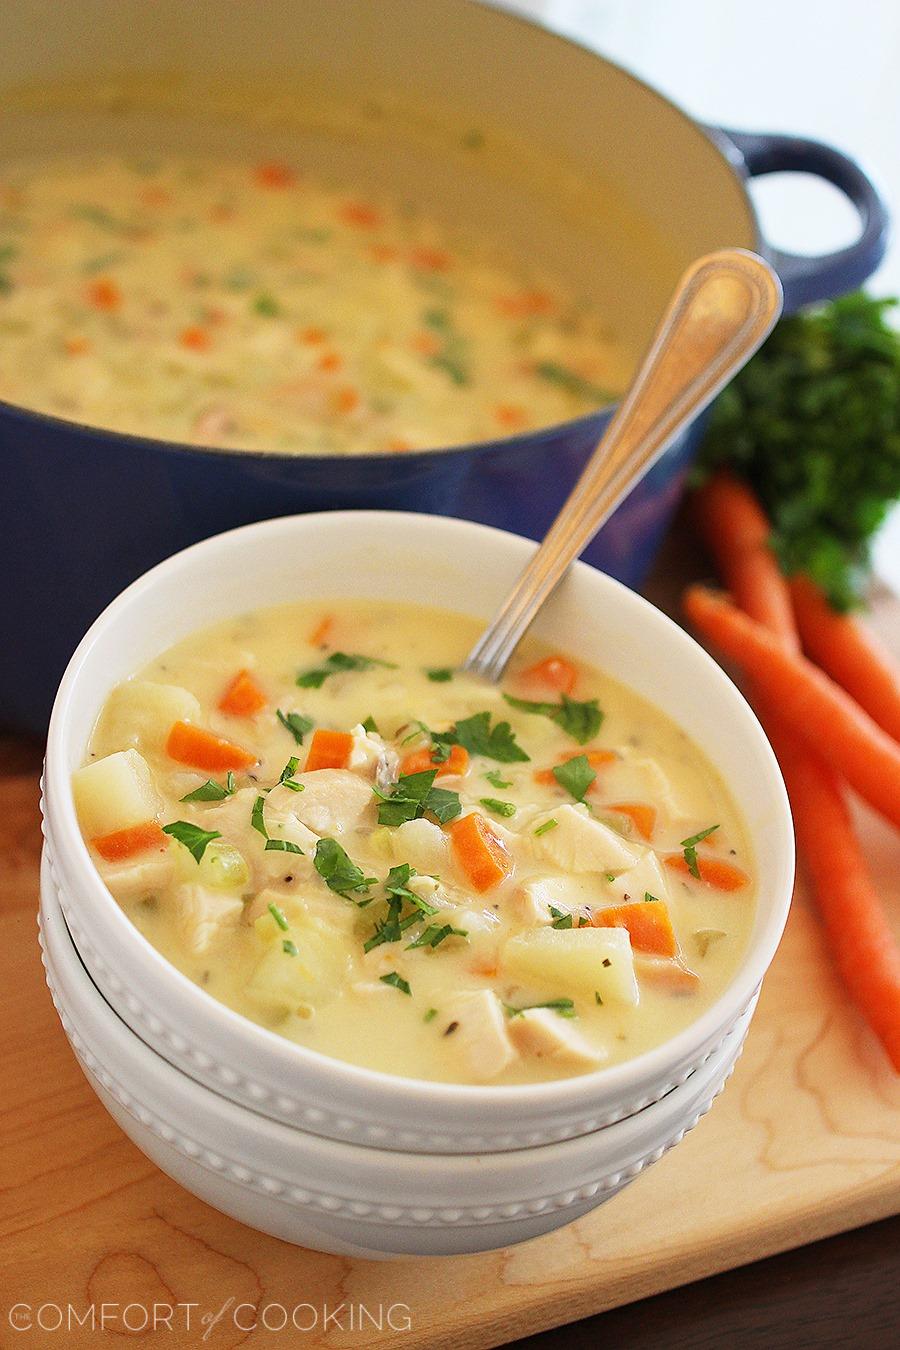 Cheesy Chicken and Potato Chowder – Warm up to a big bowlful of this easy, cheesy chicken chowder with potatoes and cheddar - perfect weeknight comfort food! | thecomfortofcooking.com